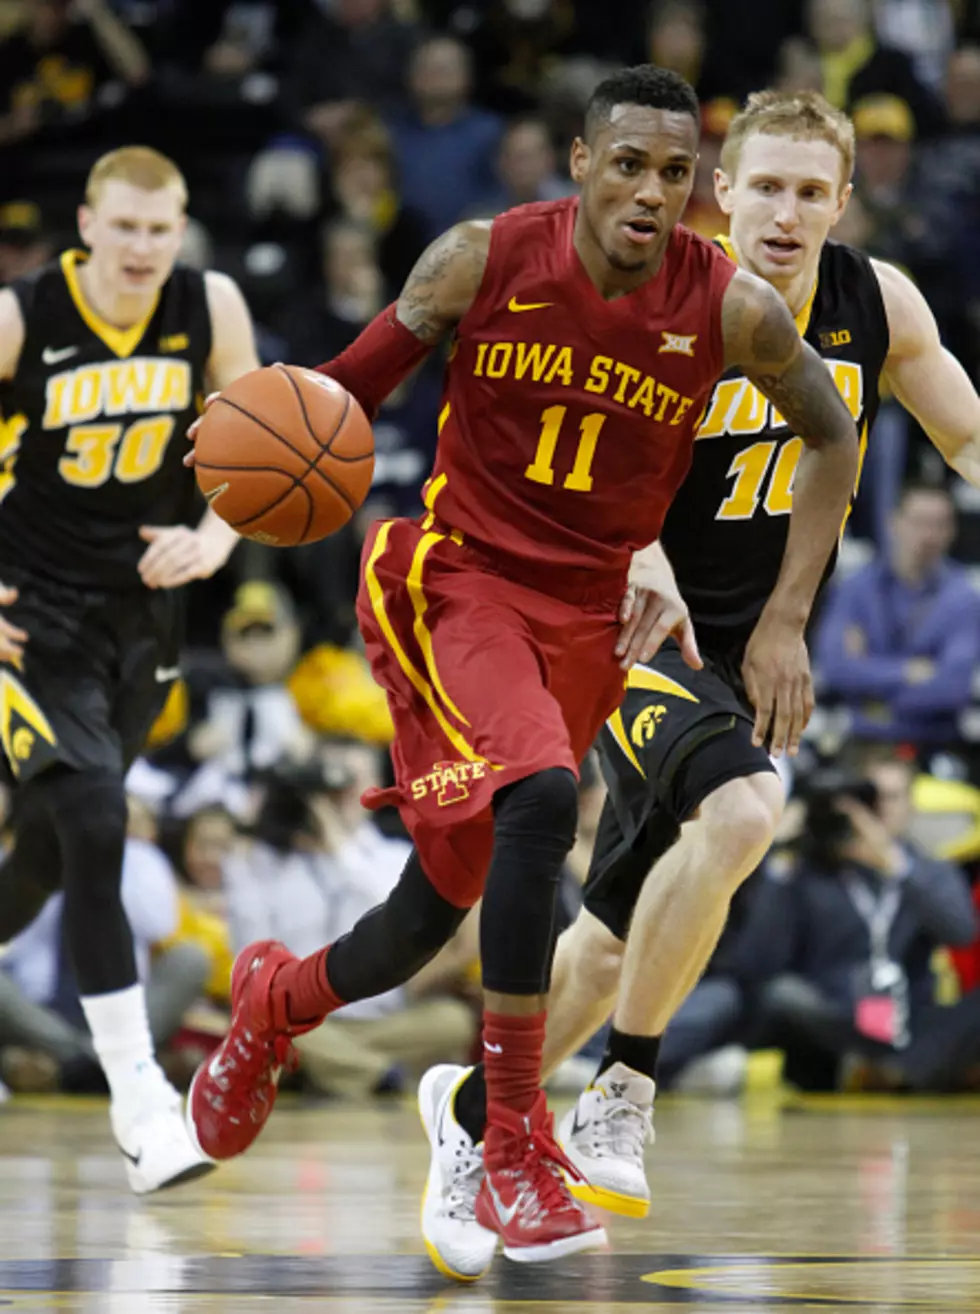 Hawks and Cyclones On Possible Collision Course in NCAAs